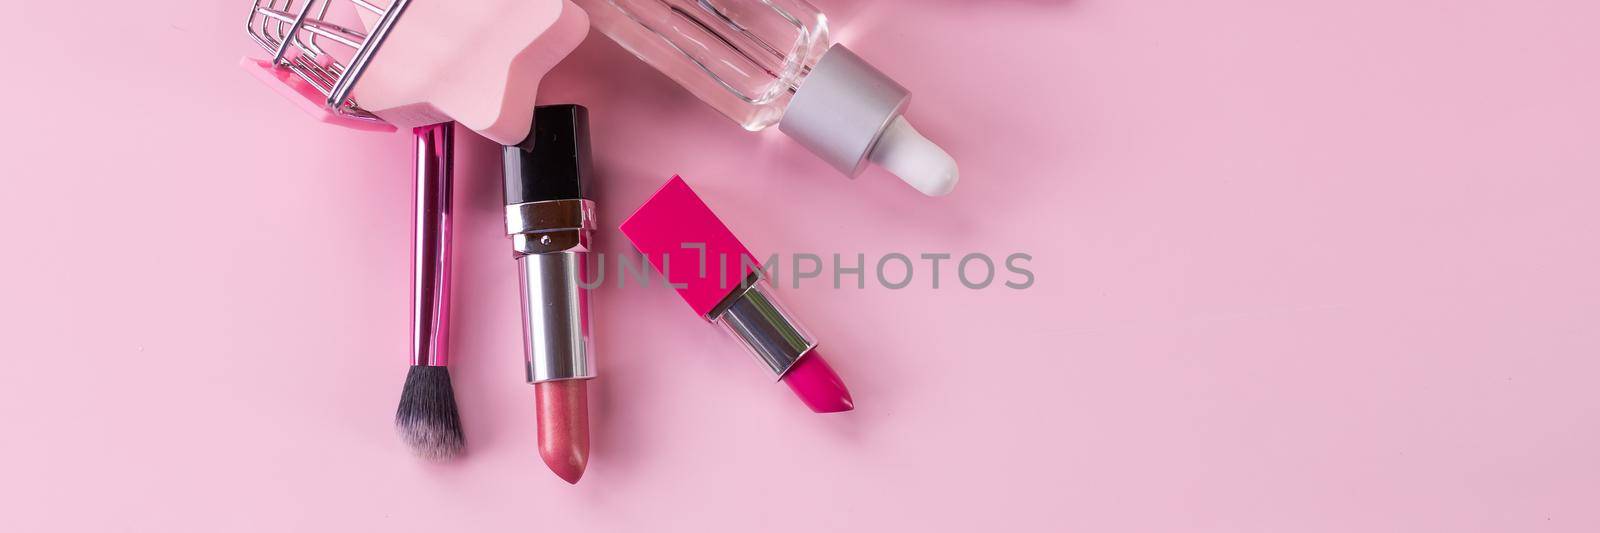 Shopping trolley with make-up products over white background